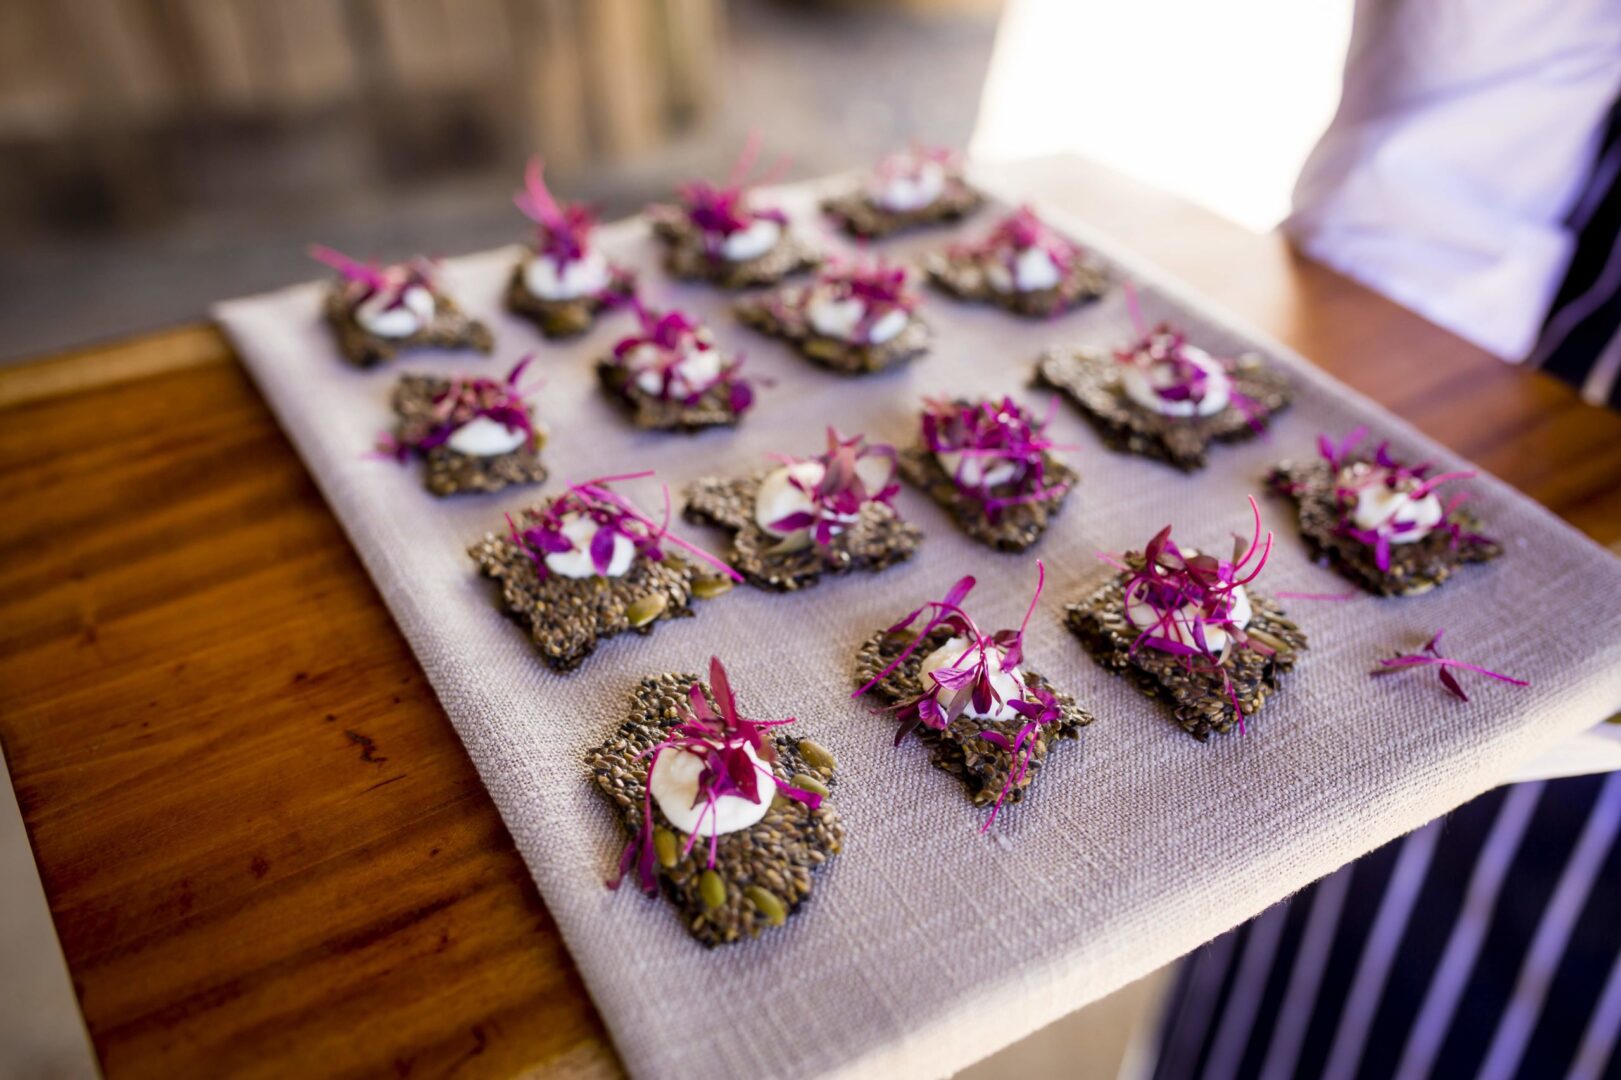 A tray of appetizers with purple flowers on it.